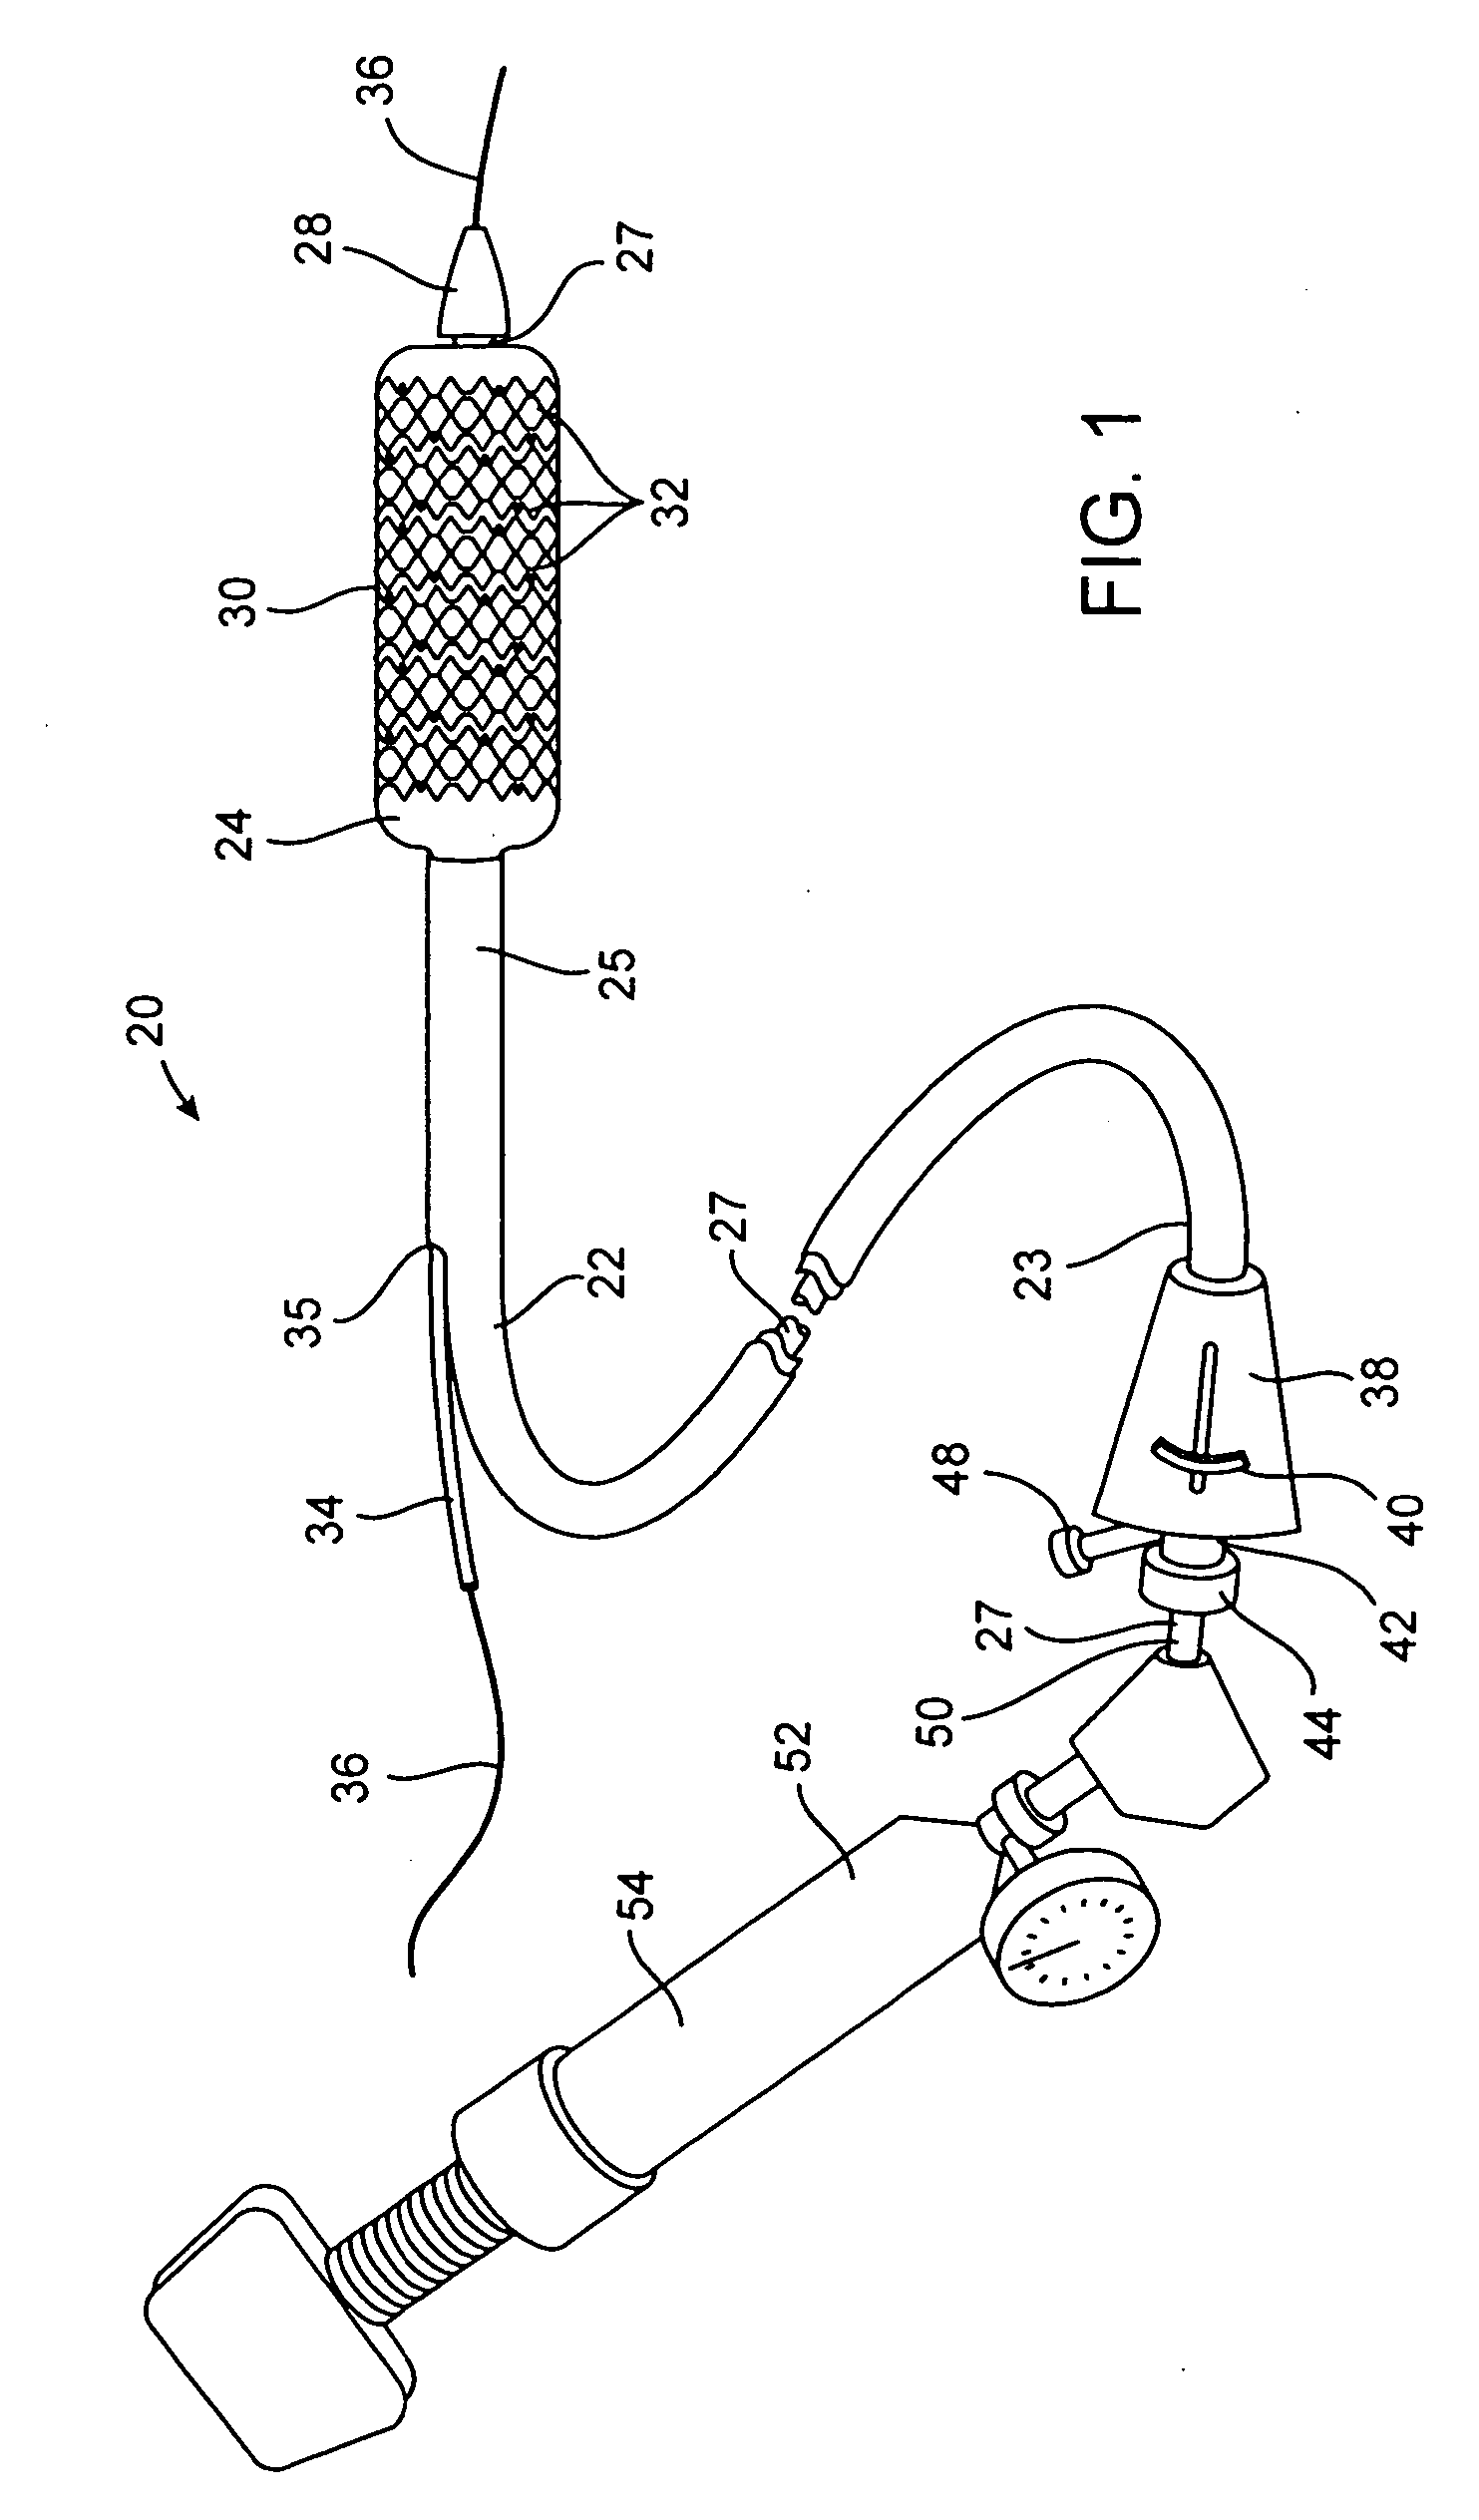 Apparatus and methods for positioning prostheses for deployment from a catheter